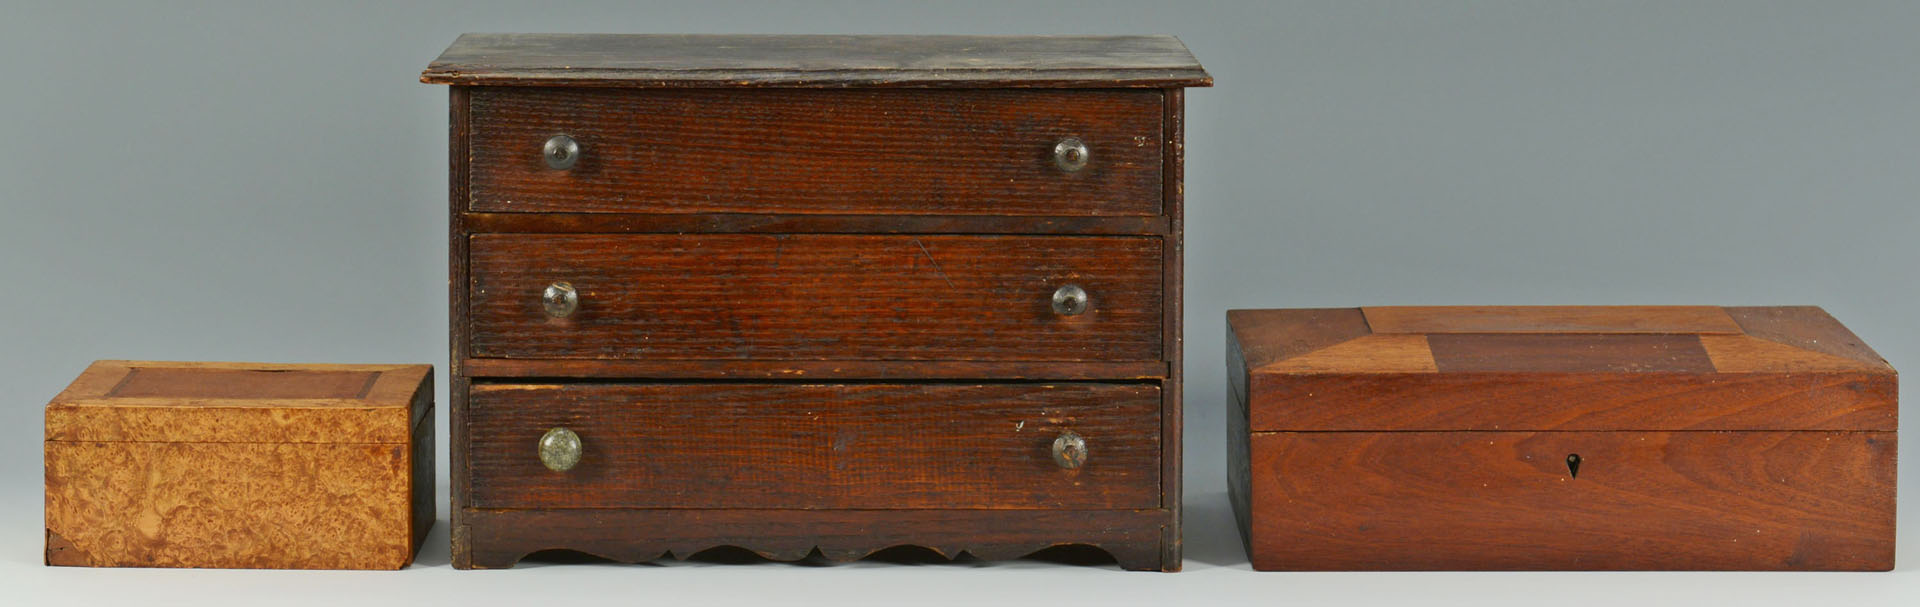 Lot 27: Grouping of 3 small chest, boxes, and silhouettes